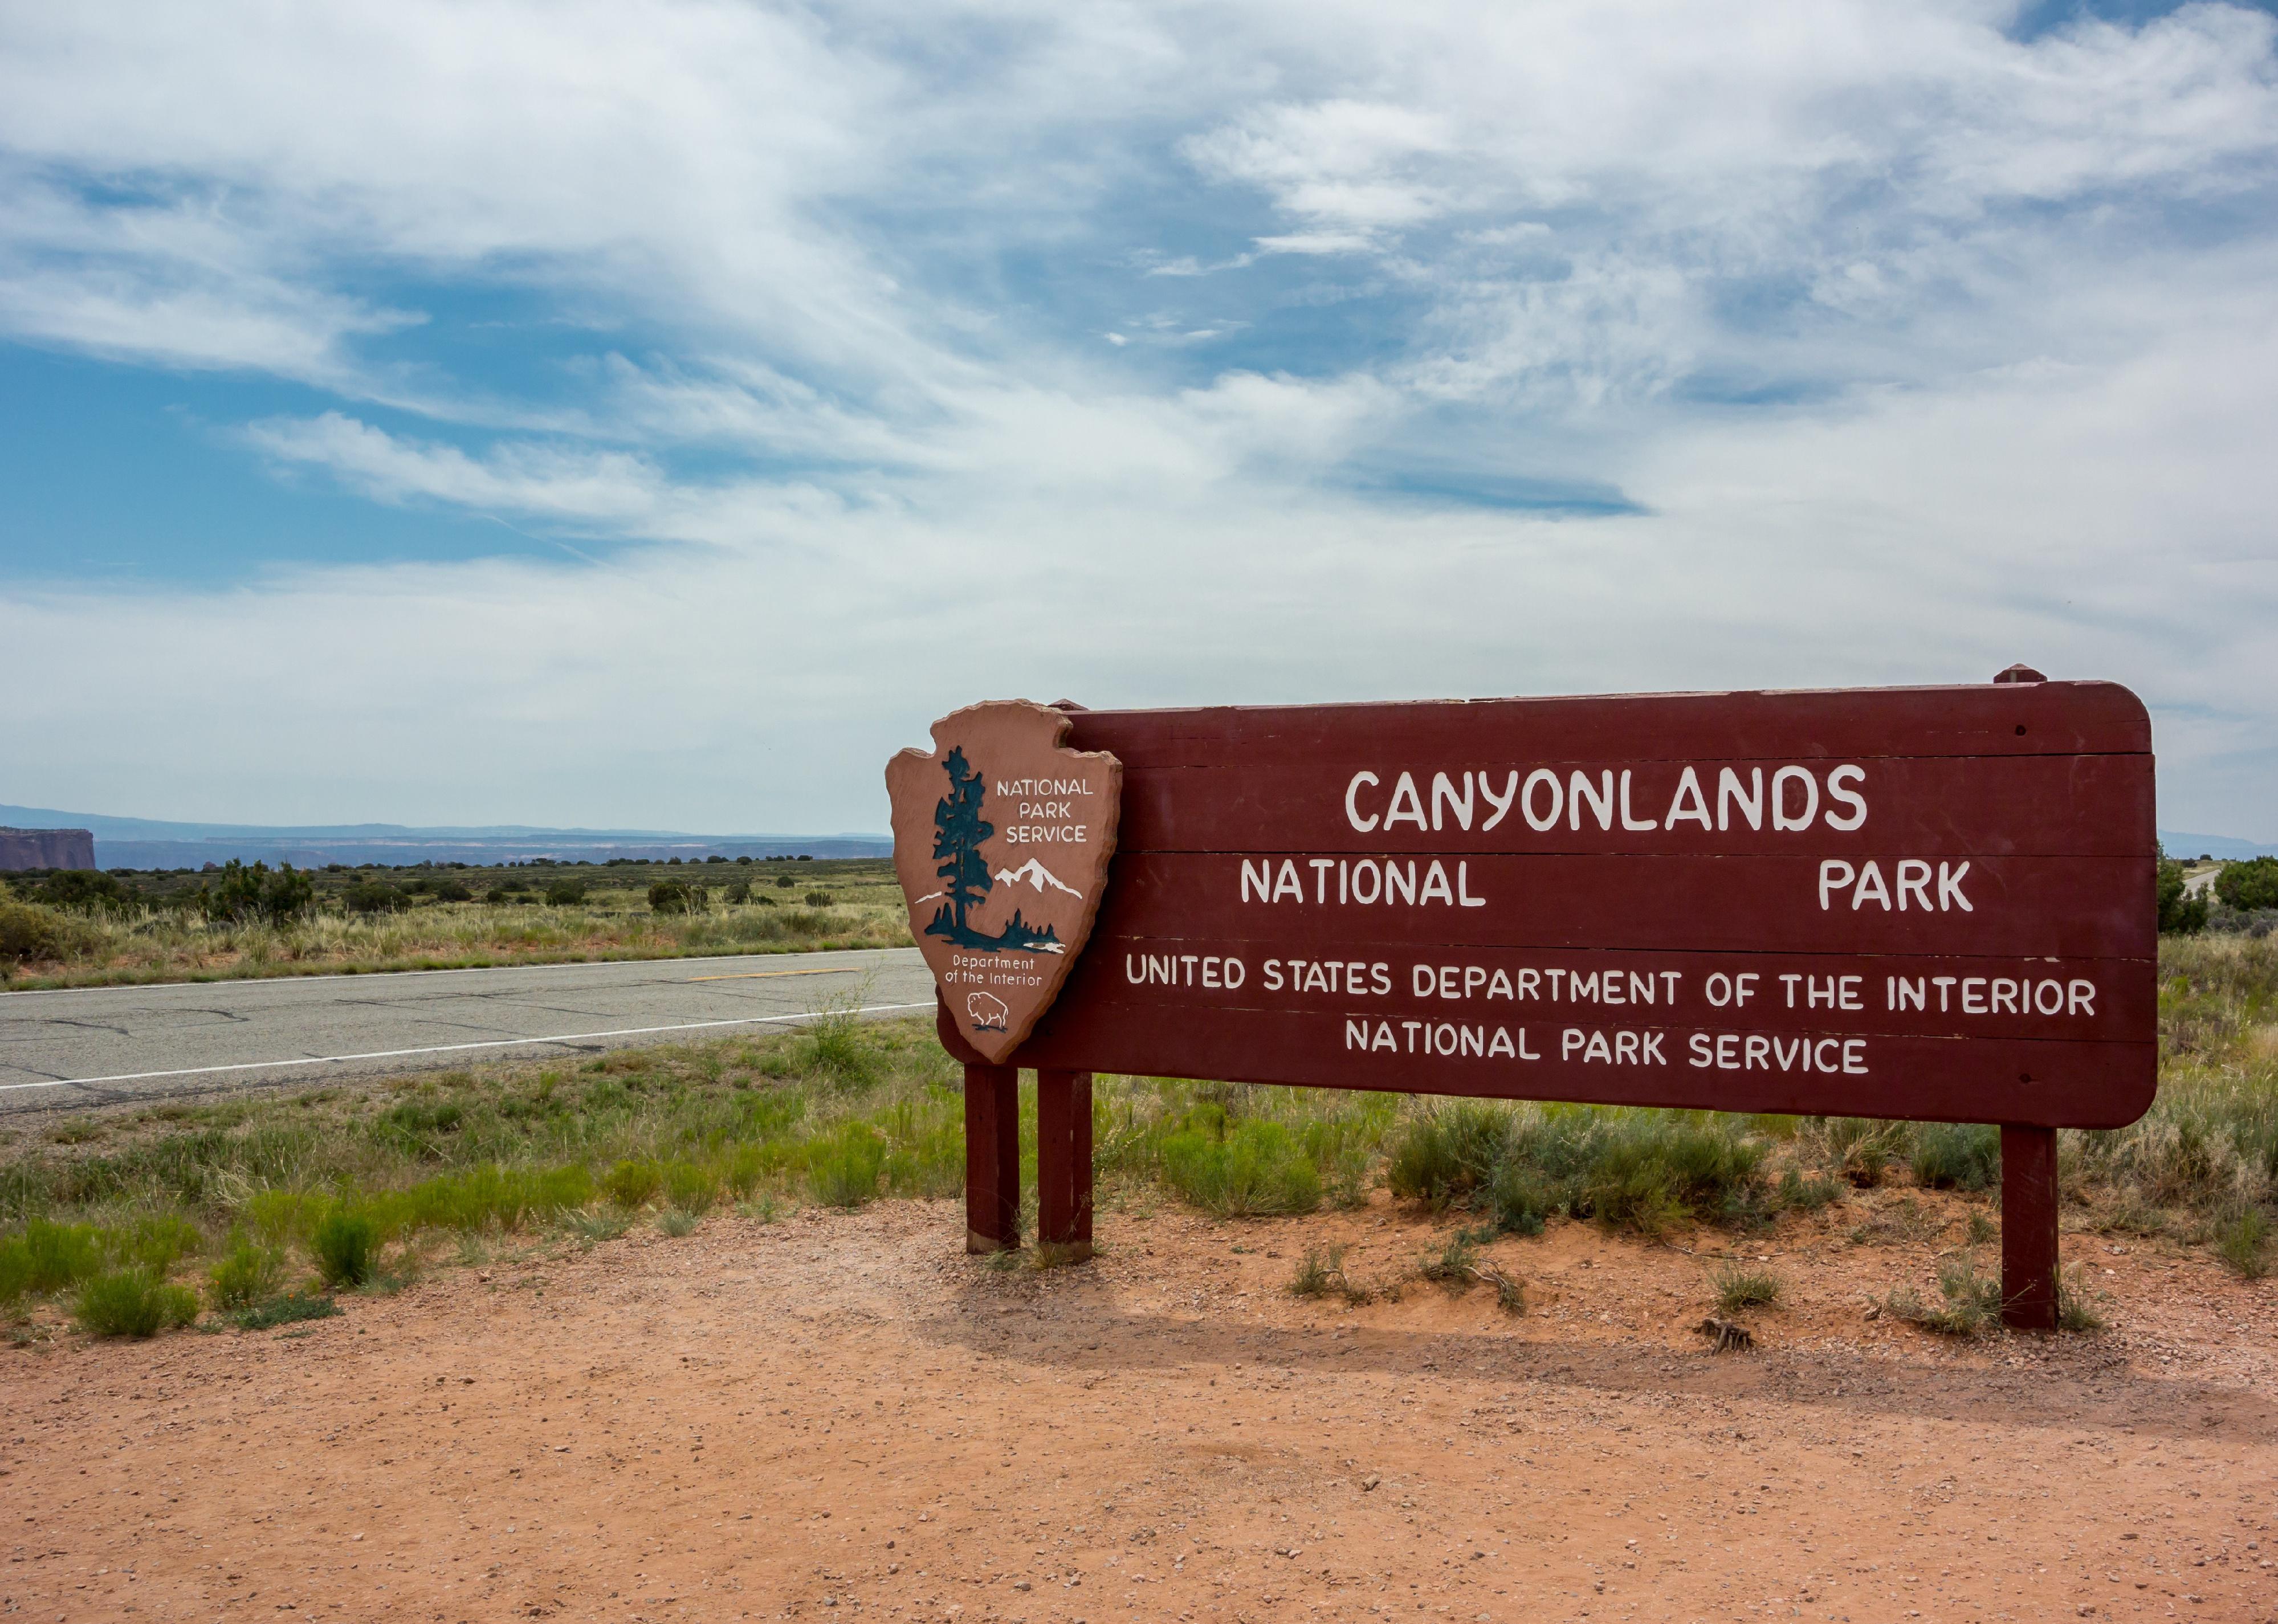 Entrance to the Island in the Sky district of Canyonlands National Park.